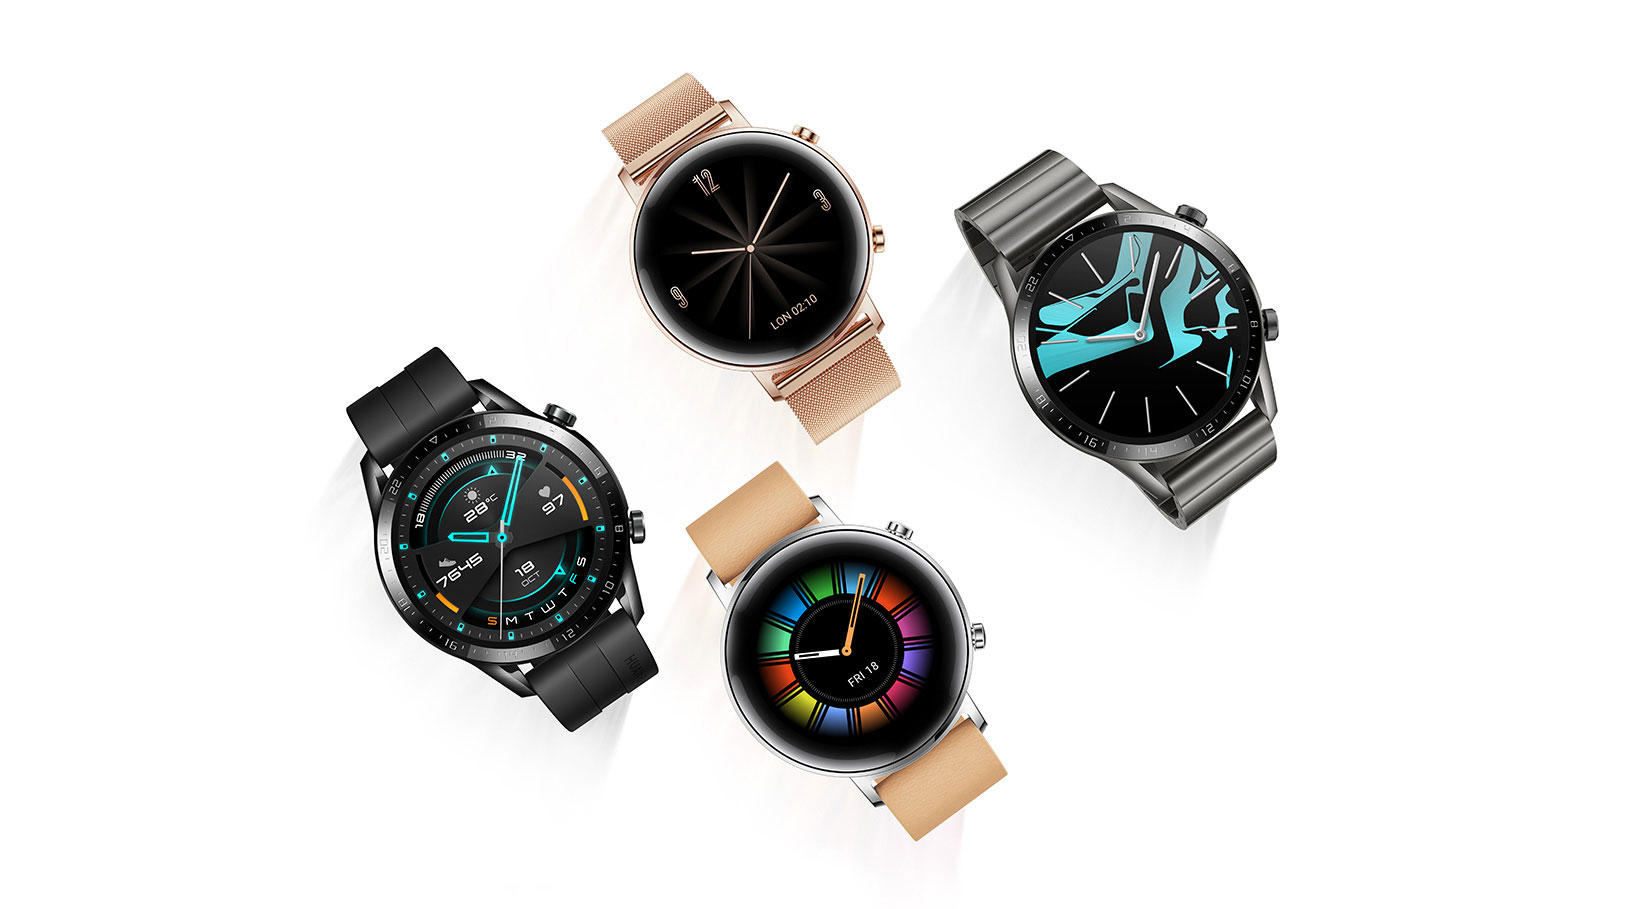 huawei s next smartwatch will be called